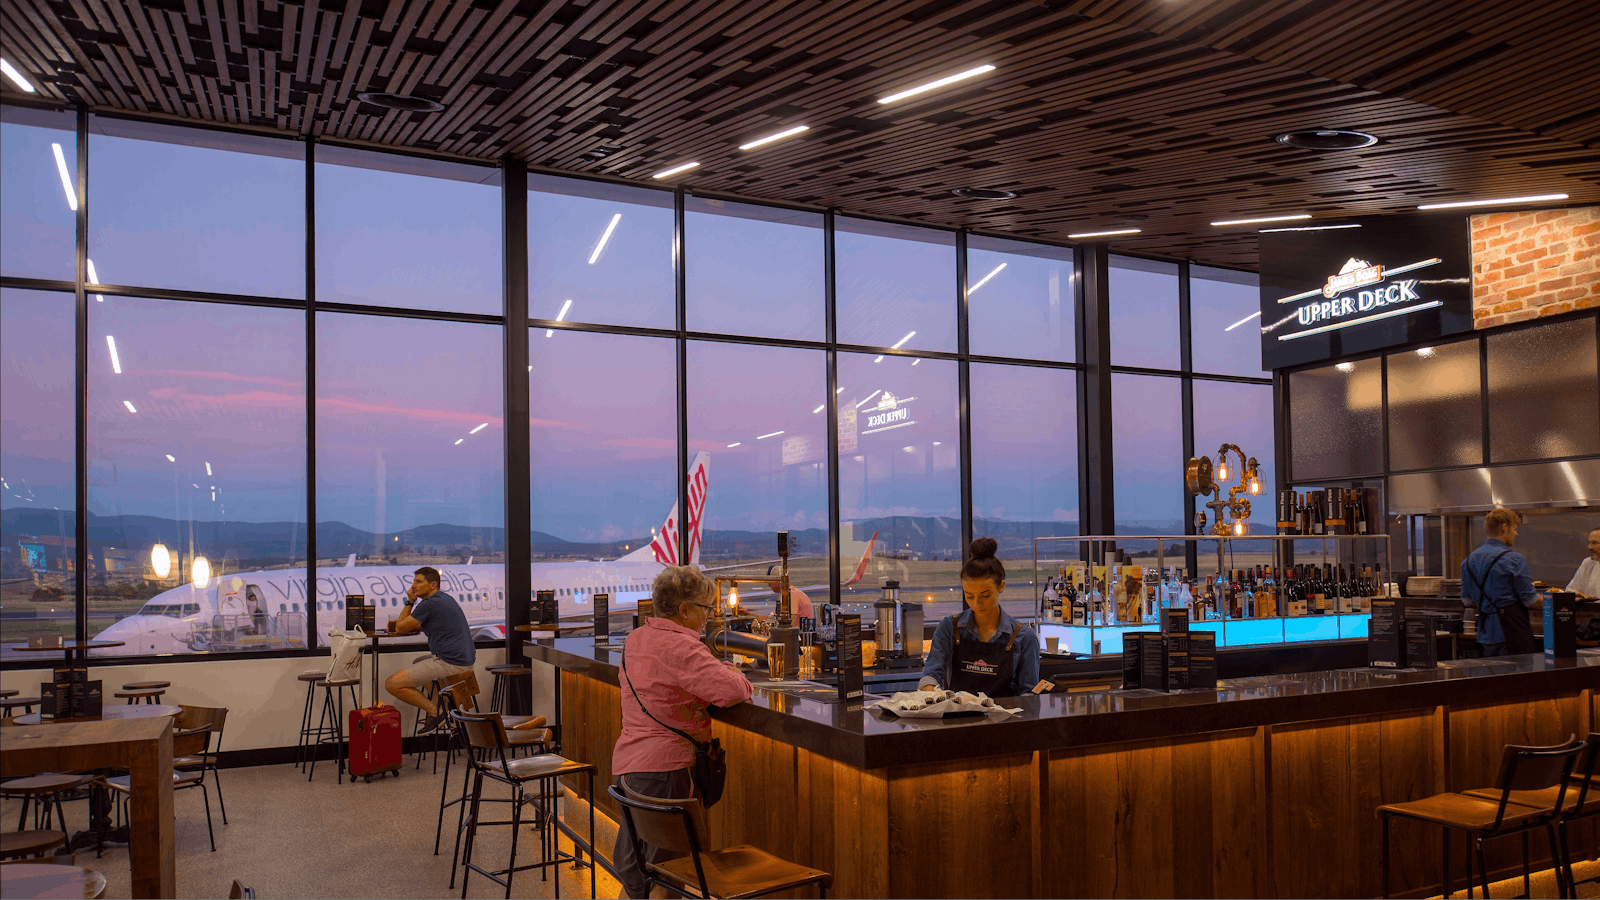 Dusk descends on the Boags Upper Deck Bar and Restaurant at Launceston Airport